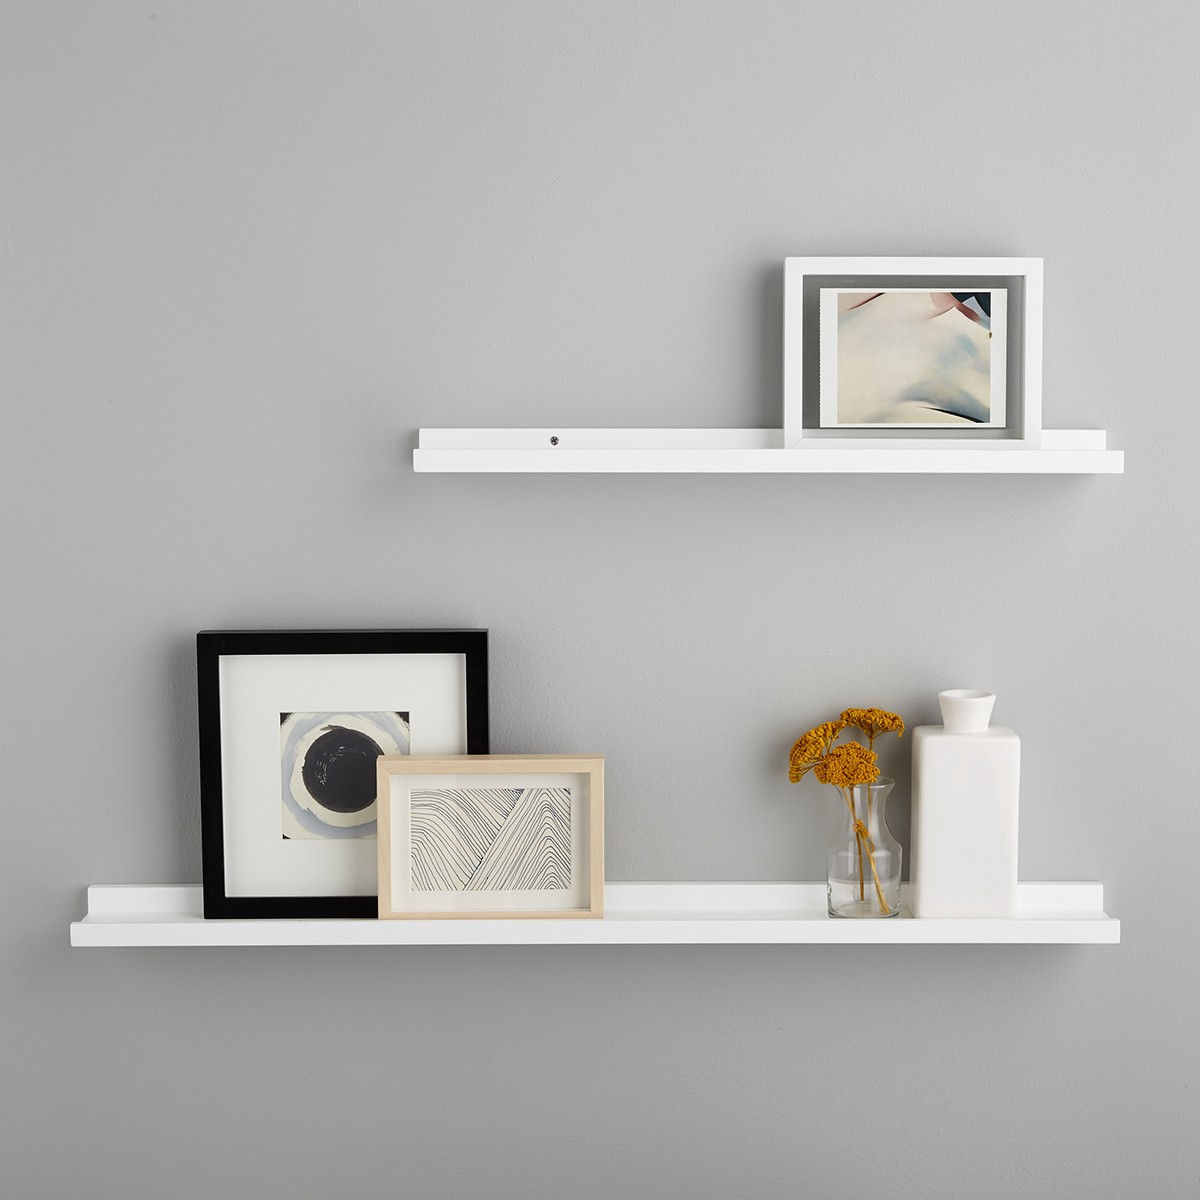 https://www.containerstore.com/catalogimages/348668/1007638g-ledge-shelf-white.jpg